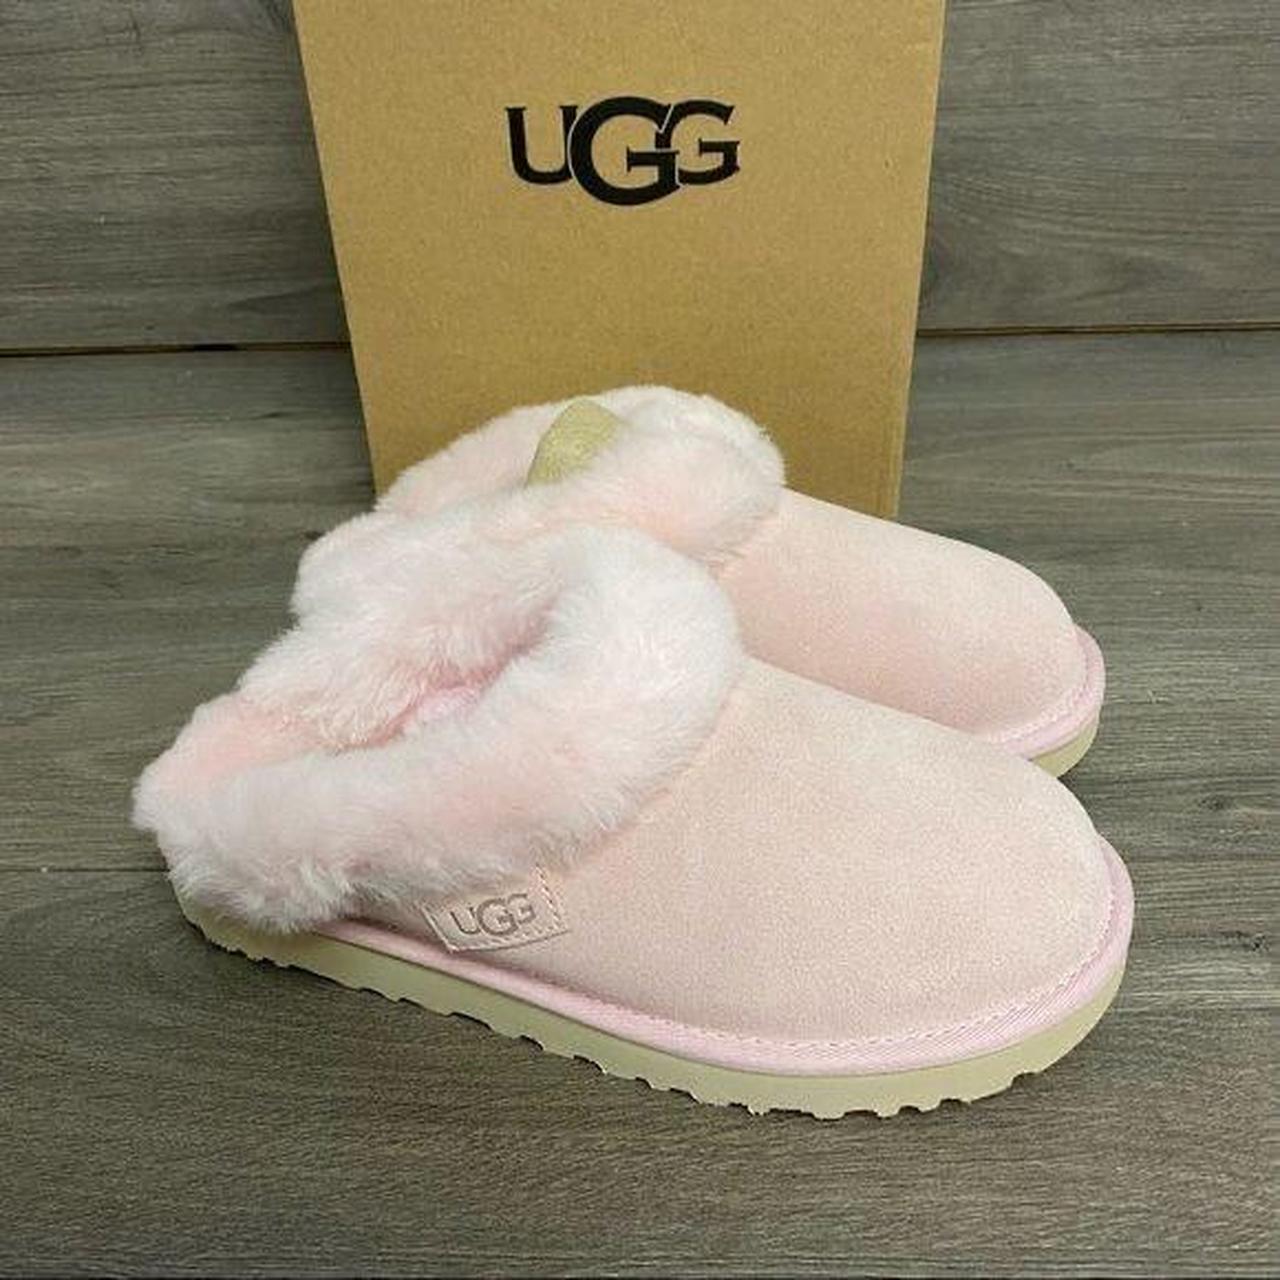 Koolaburra By UGG Women's Pink and White Slippers (2)